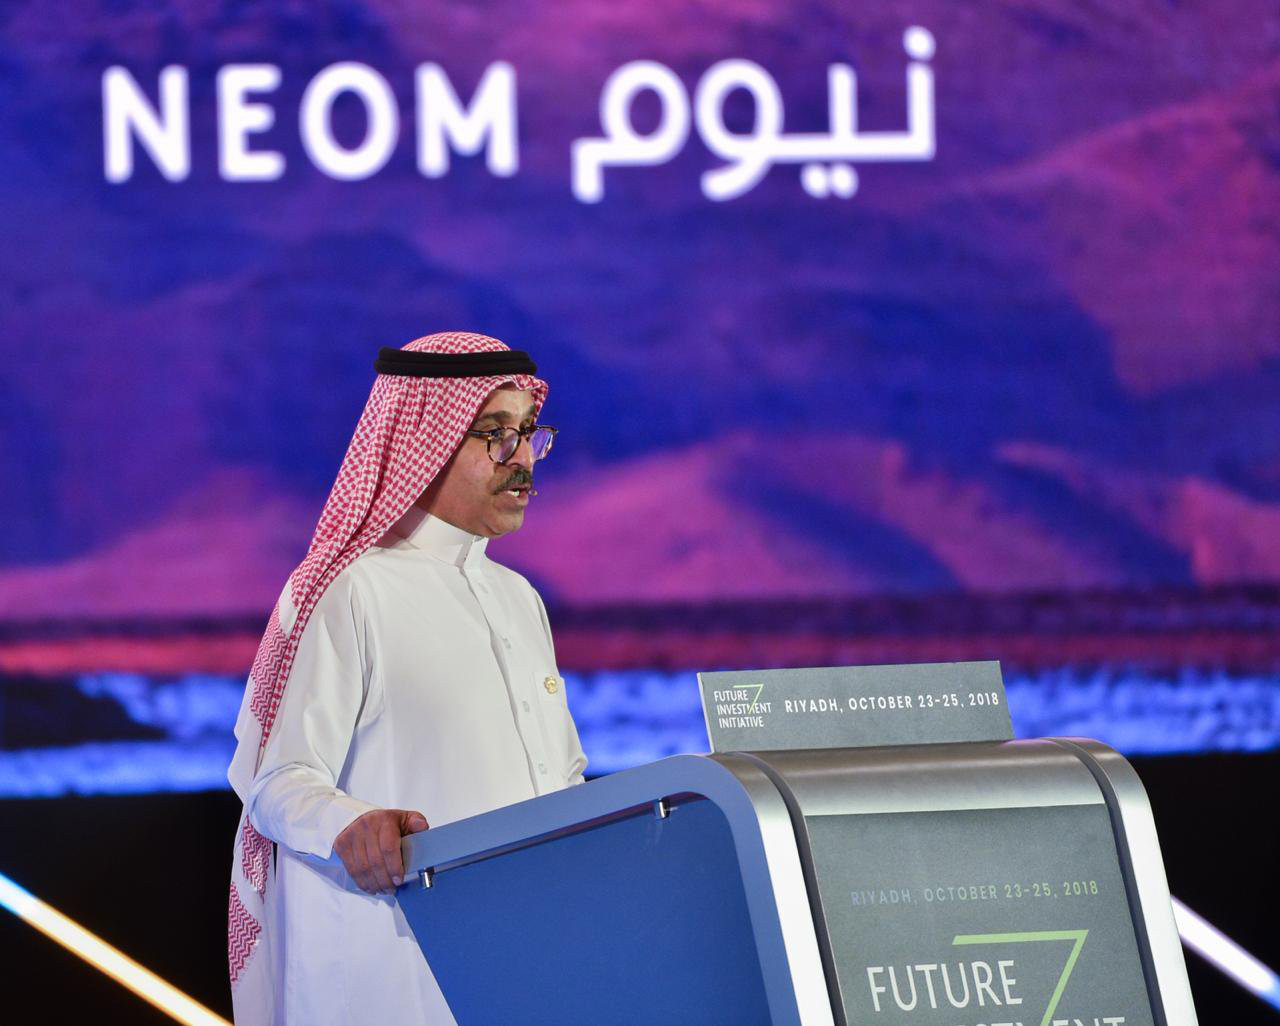 Image of man speaking at podium with purple sign behind him that says NEOM in English and Arabic